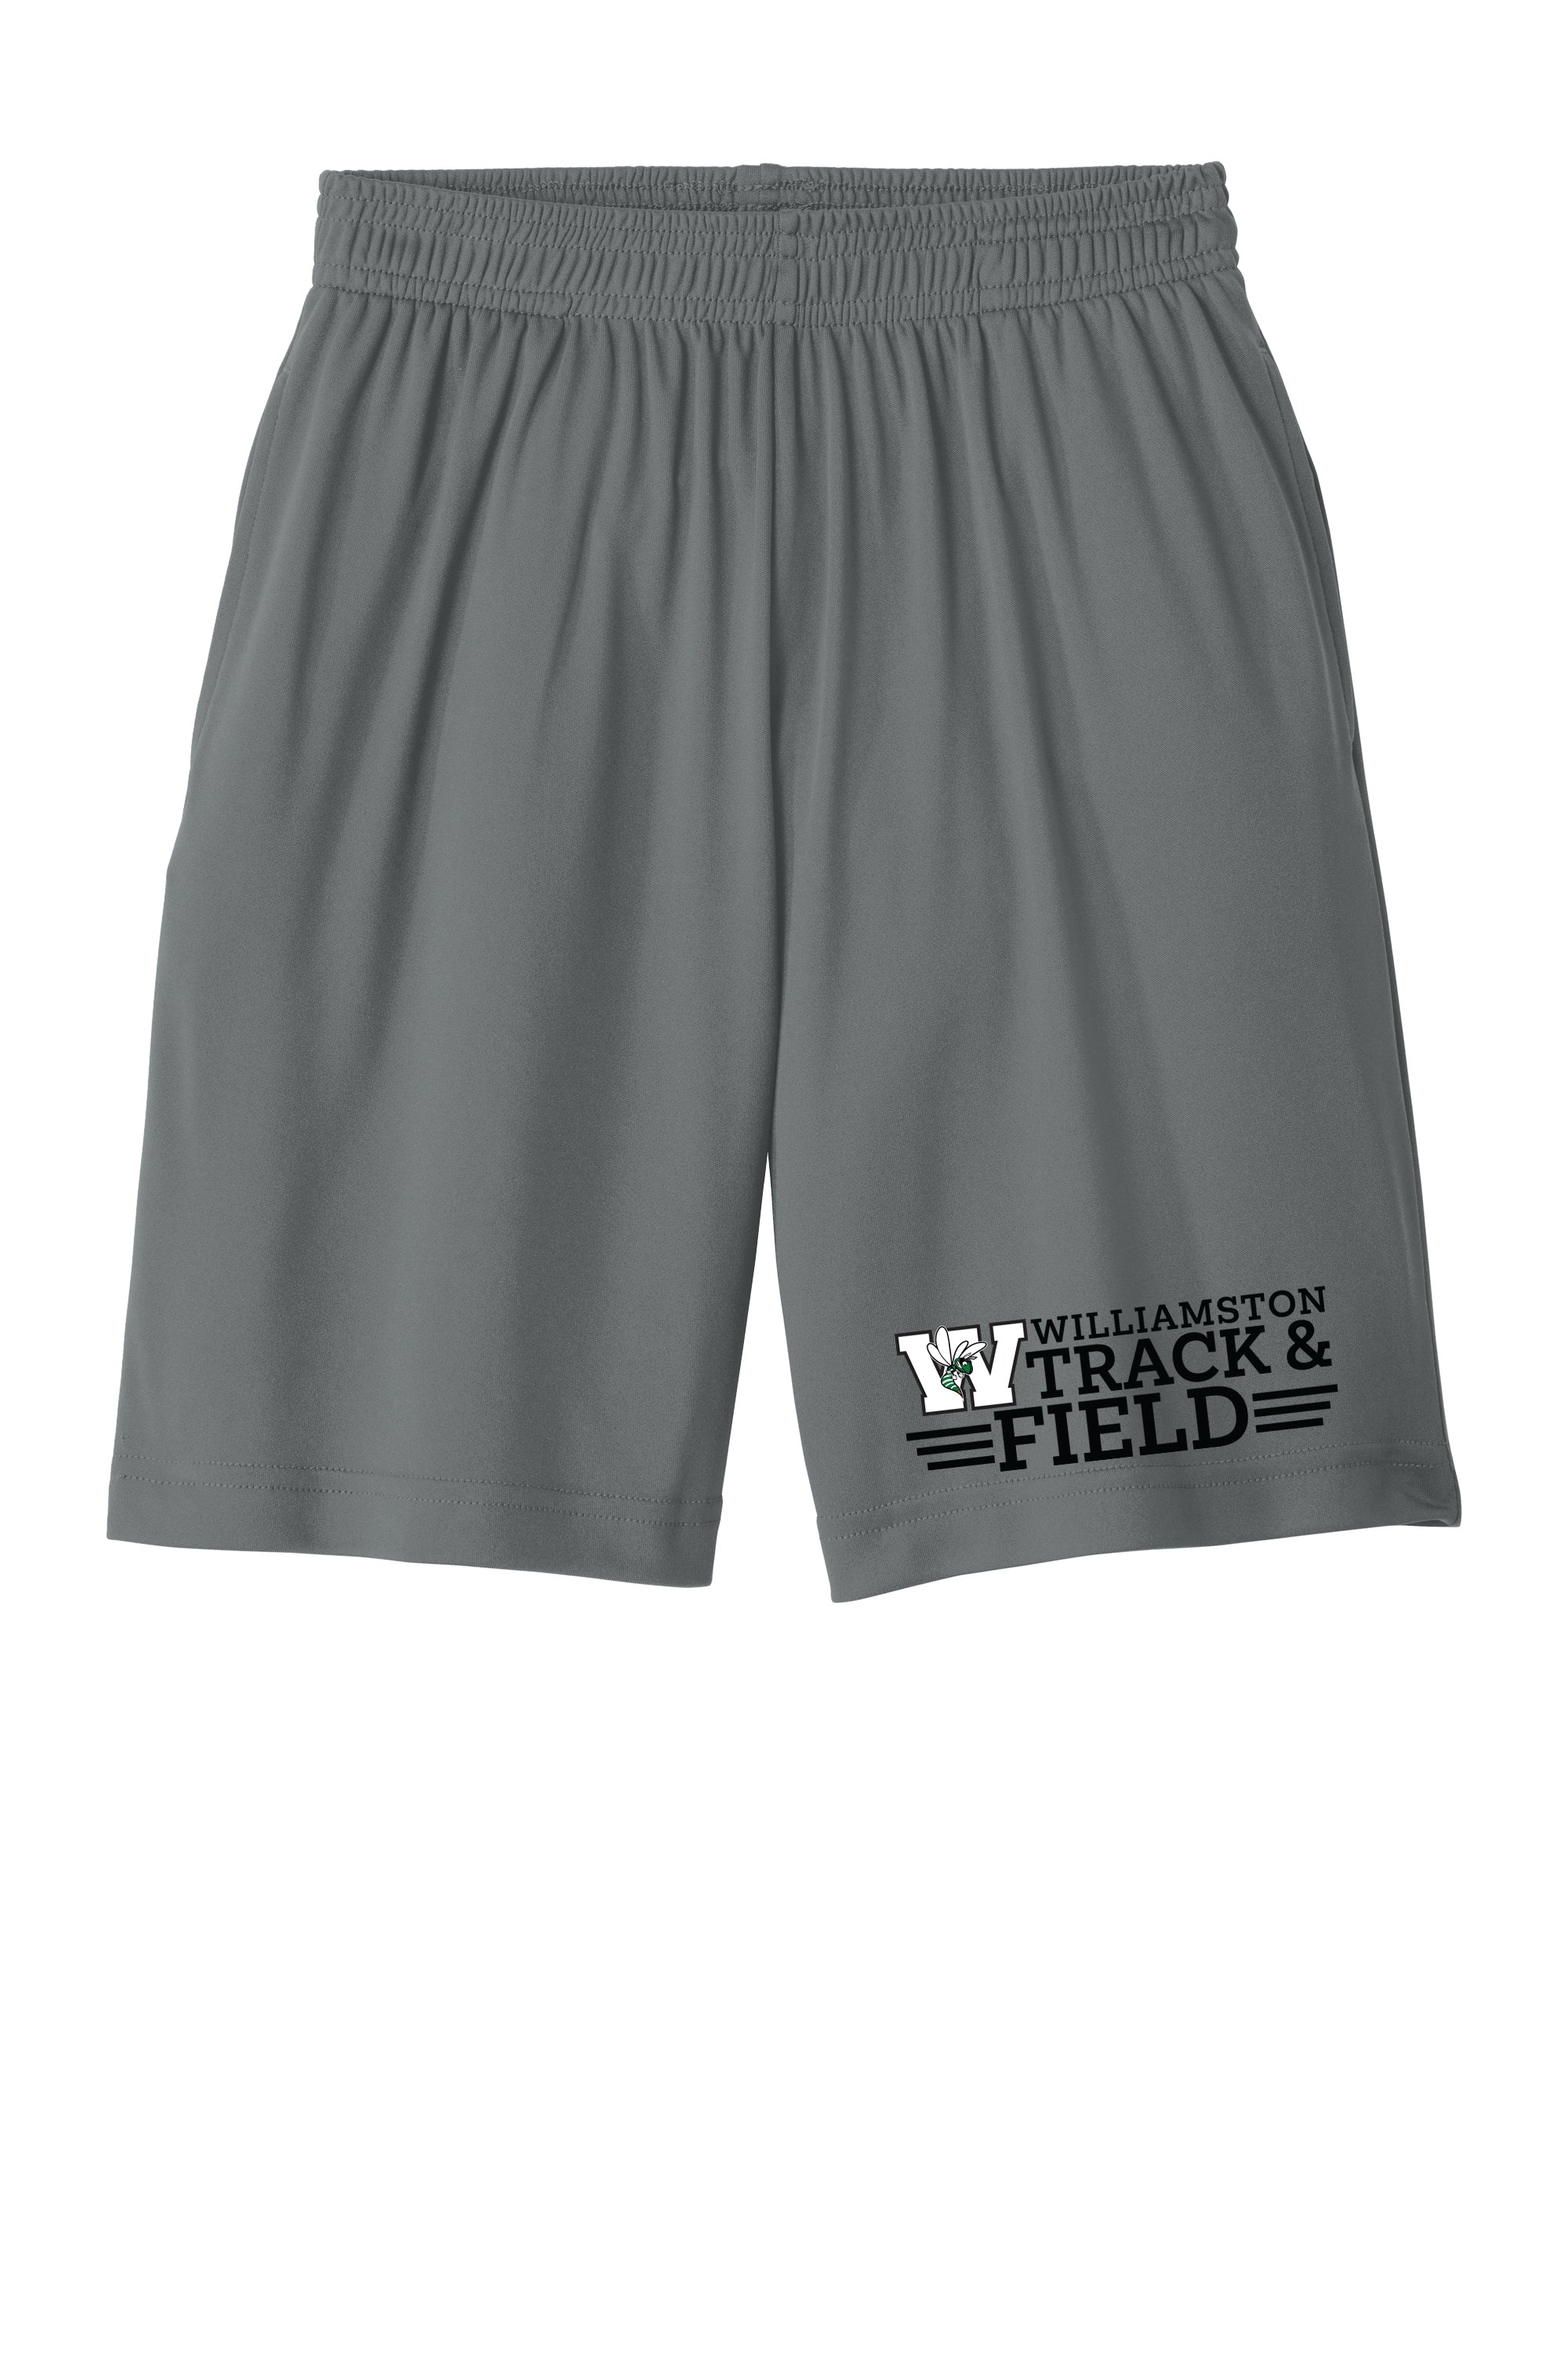 Williamston Track and Field - Shorts